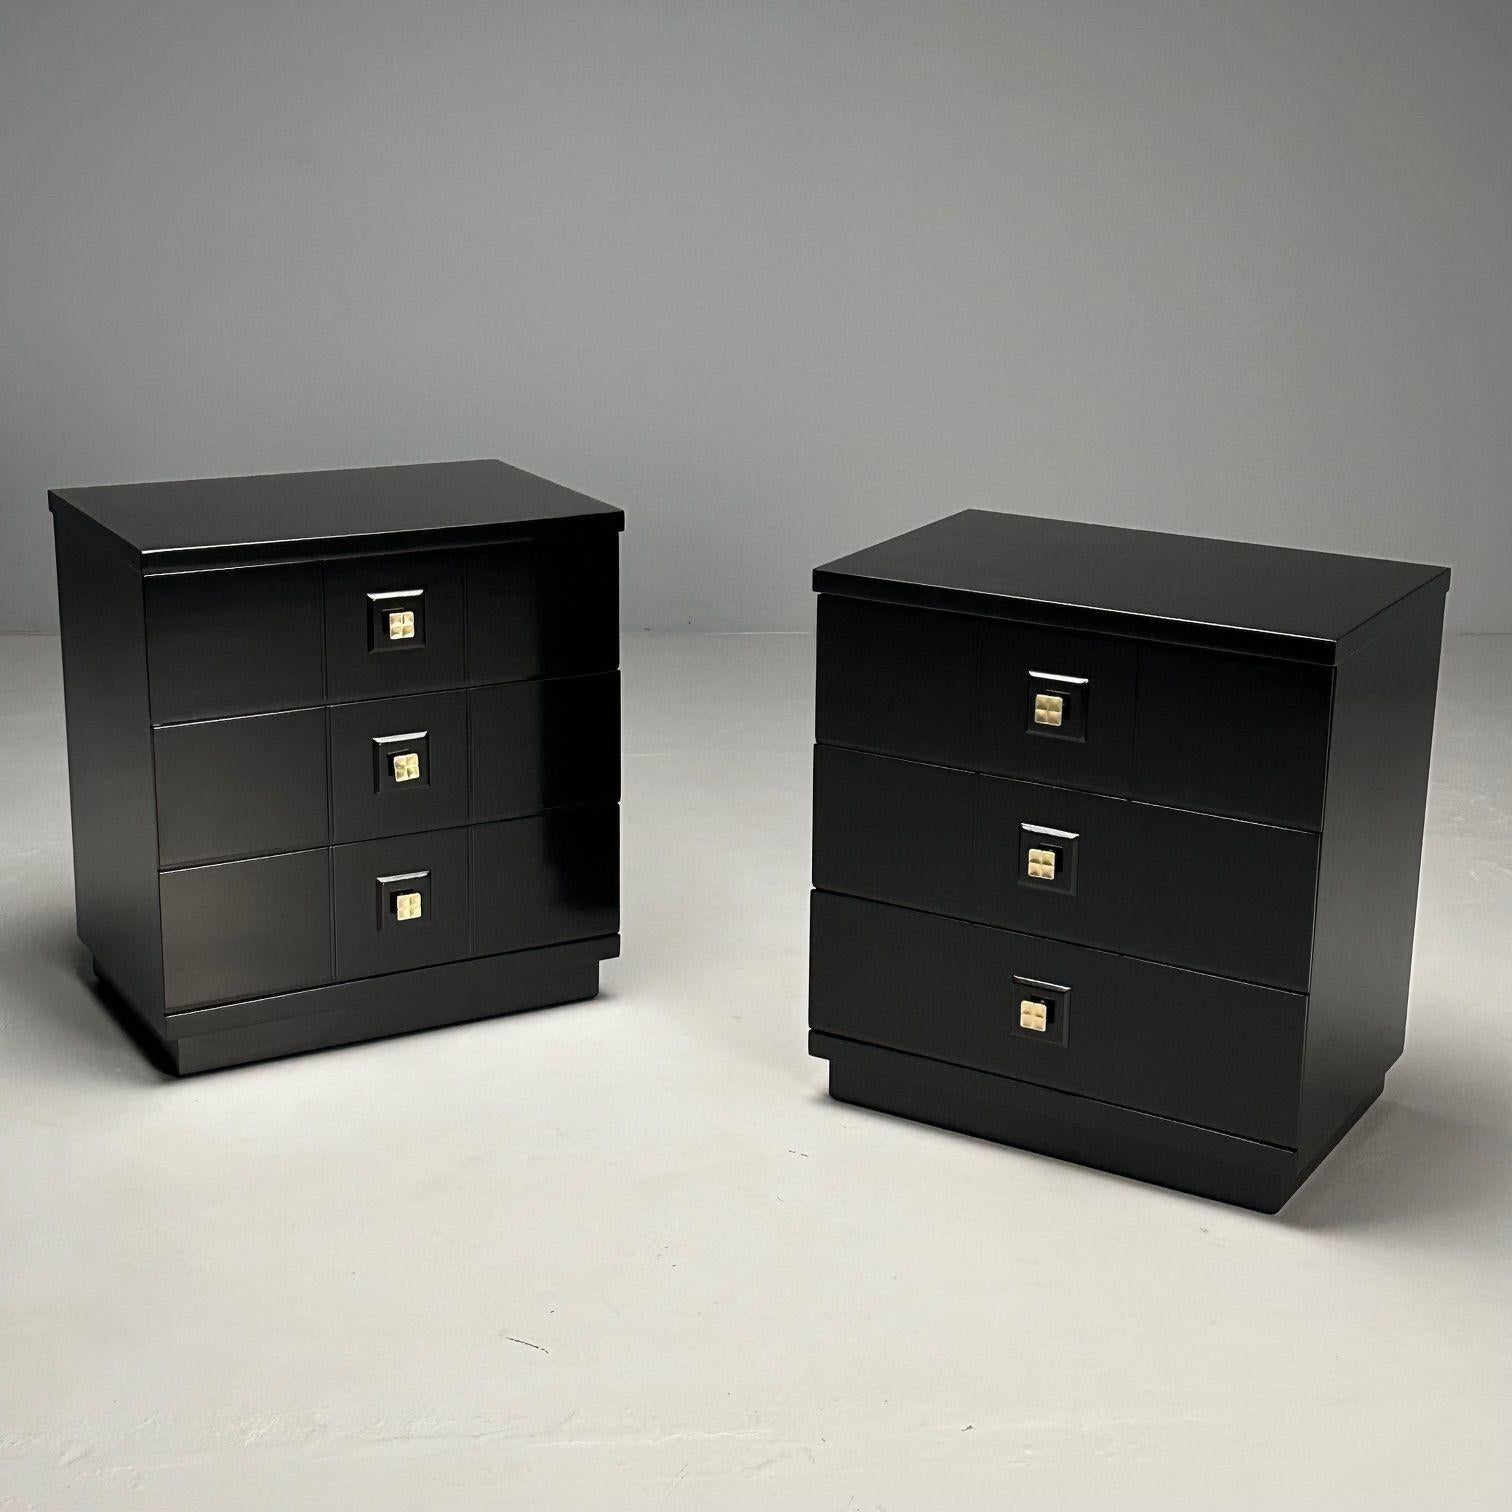 American Mid-Century Modern, Nightstands, Chests, Black Lacquer, Brass, USA, 1970s For Sale